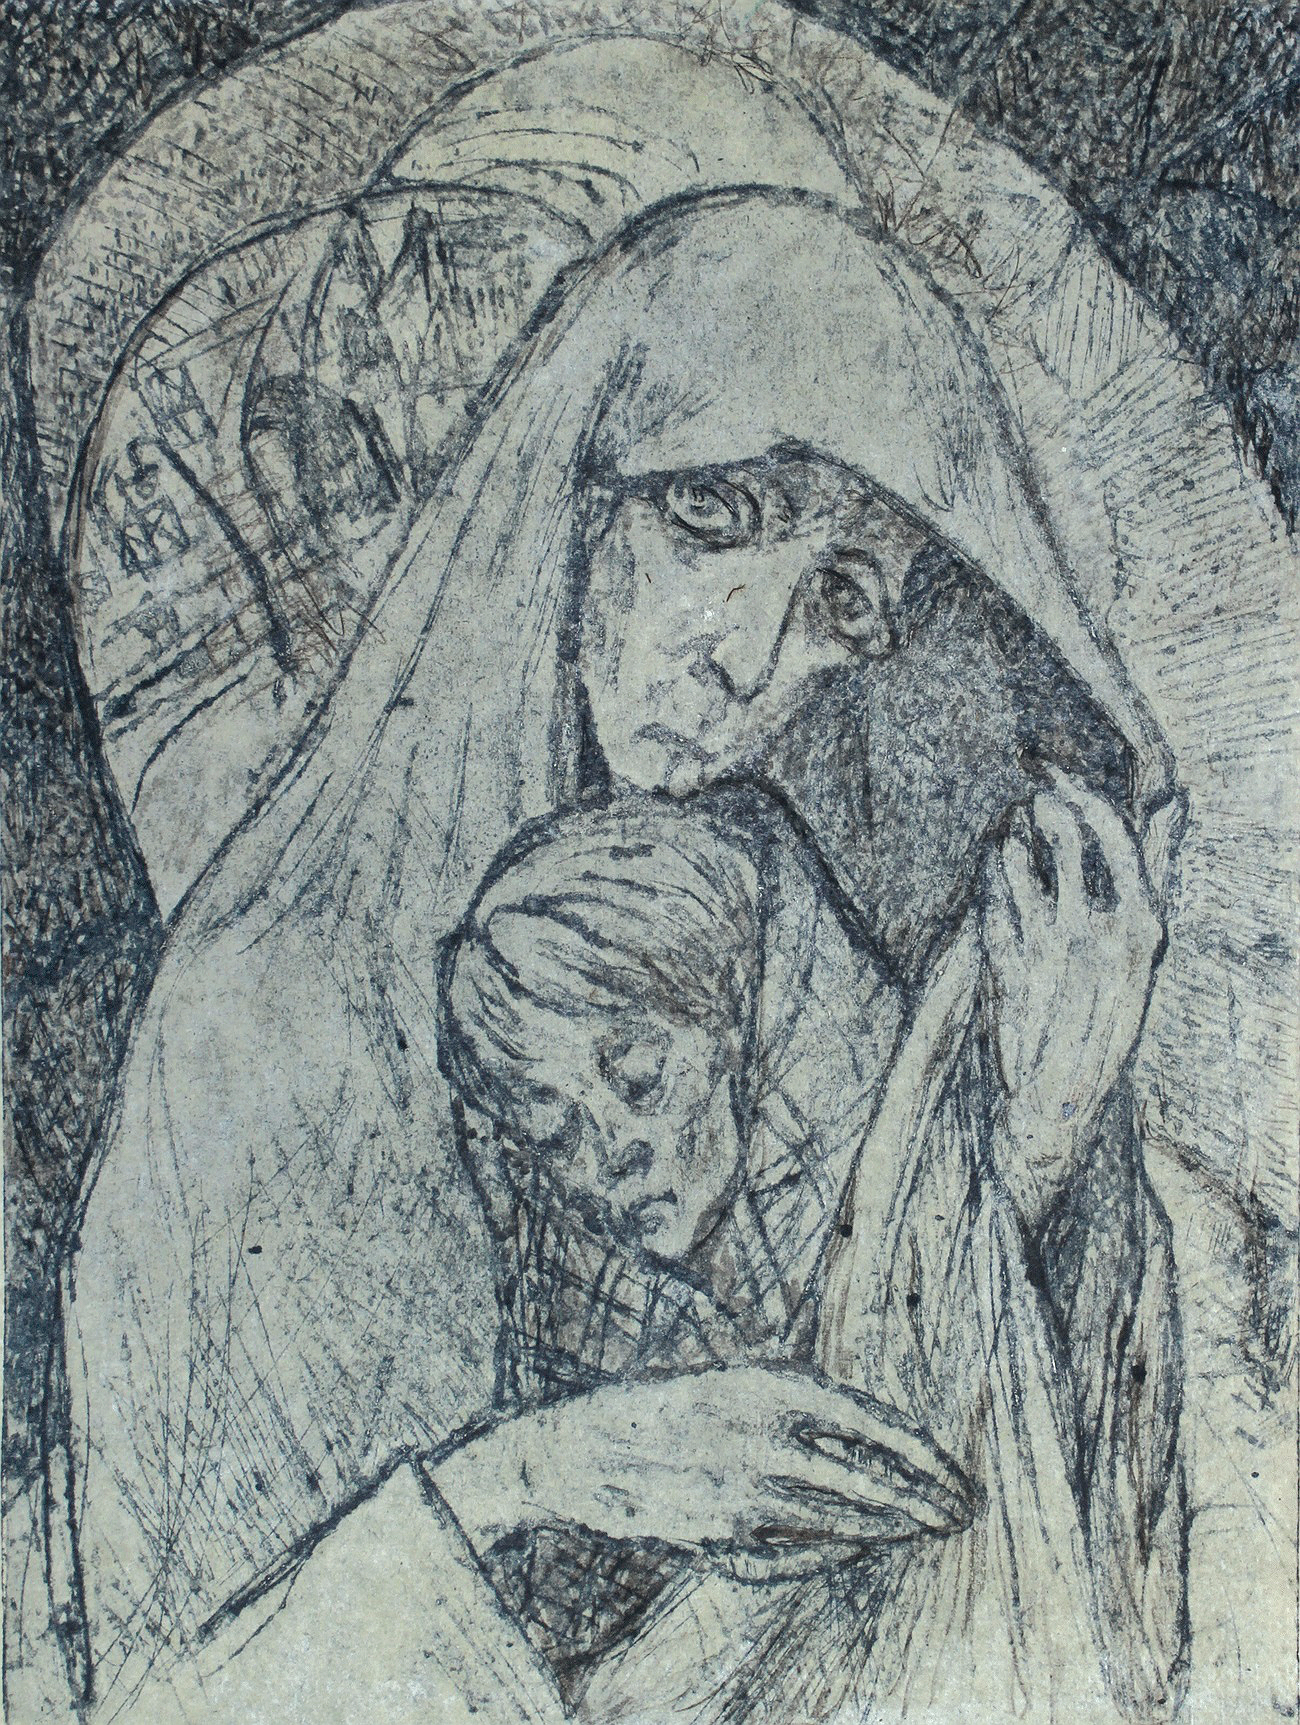 Together with her co-author, Svetlana Magayeva, Marttila published Martyrs of the Siege of Leningrad, a book that features stories of ordinary people who lived and survived in horrible conditions and starvation.  // Picture: Leningrad Madonna (1942)